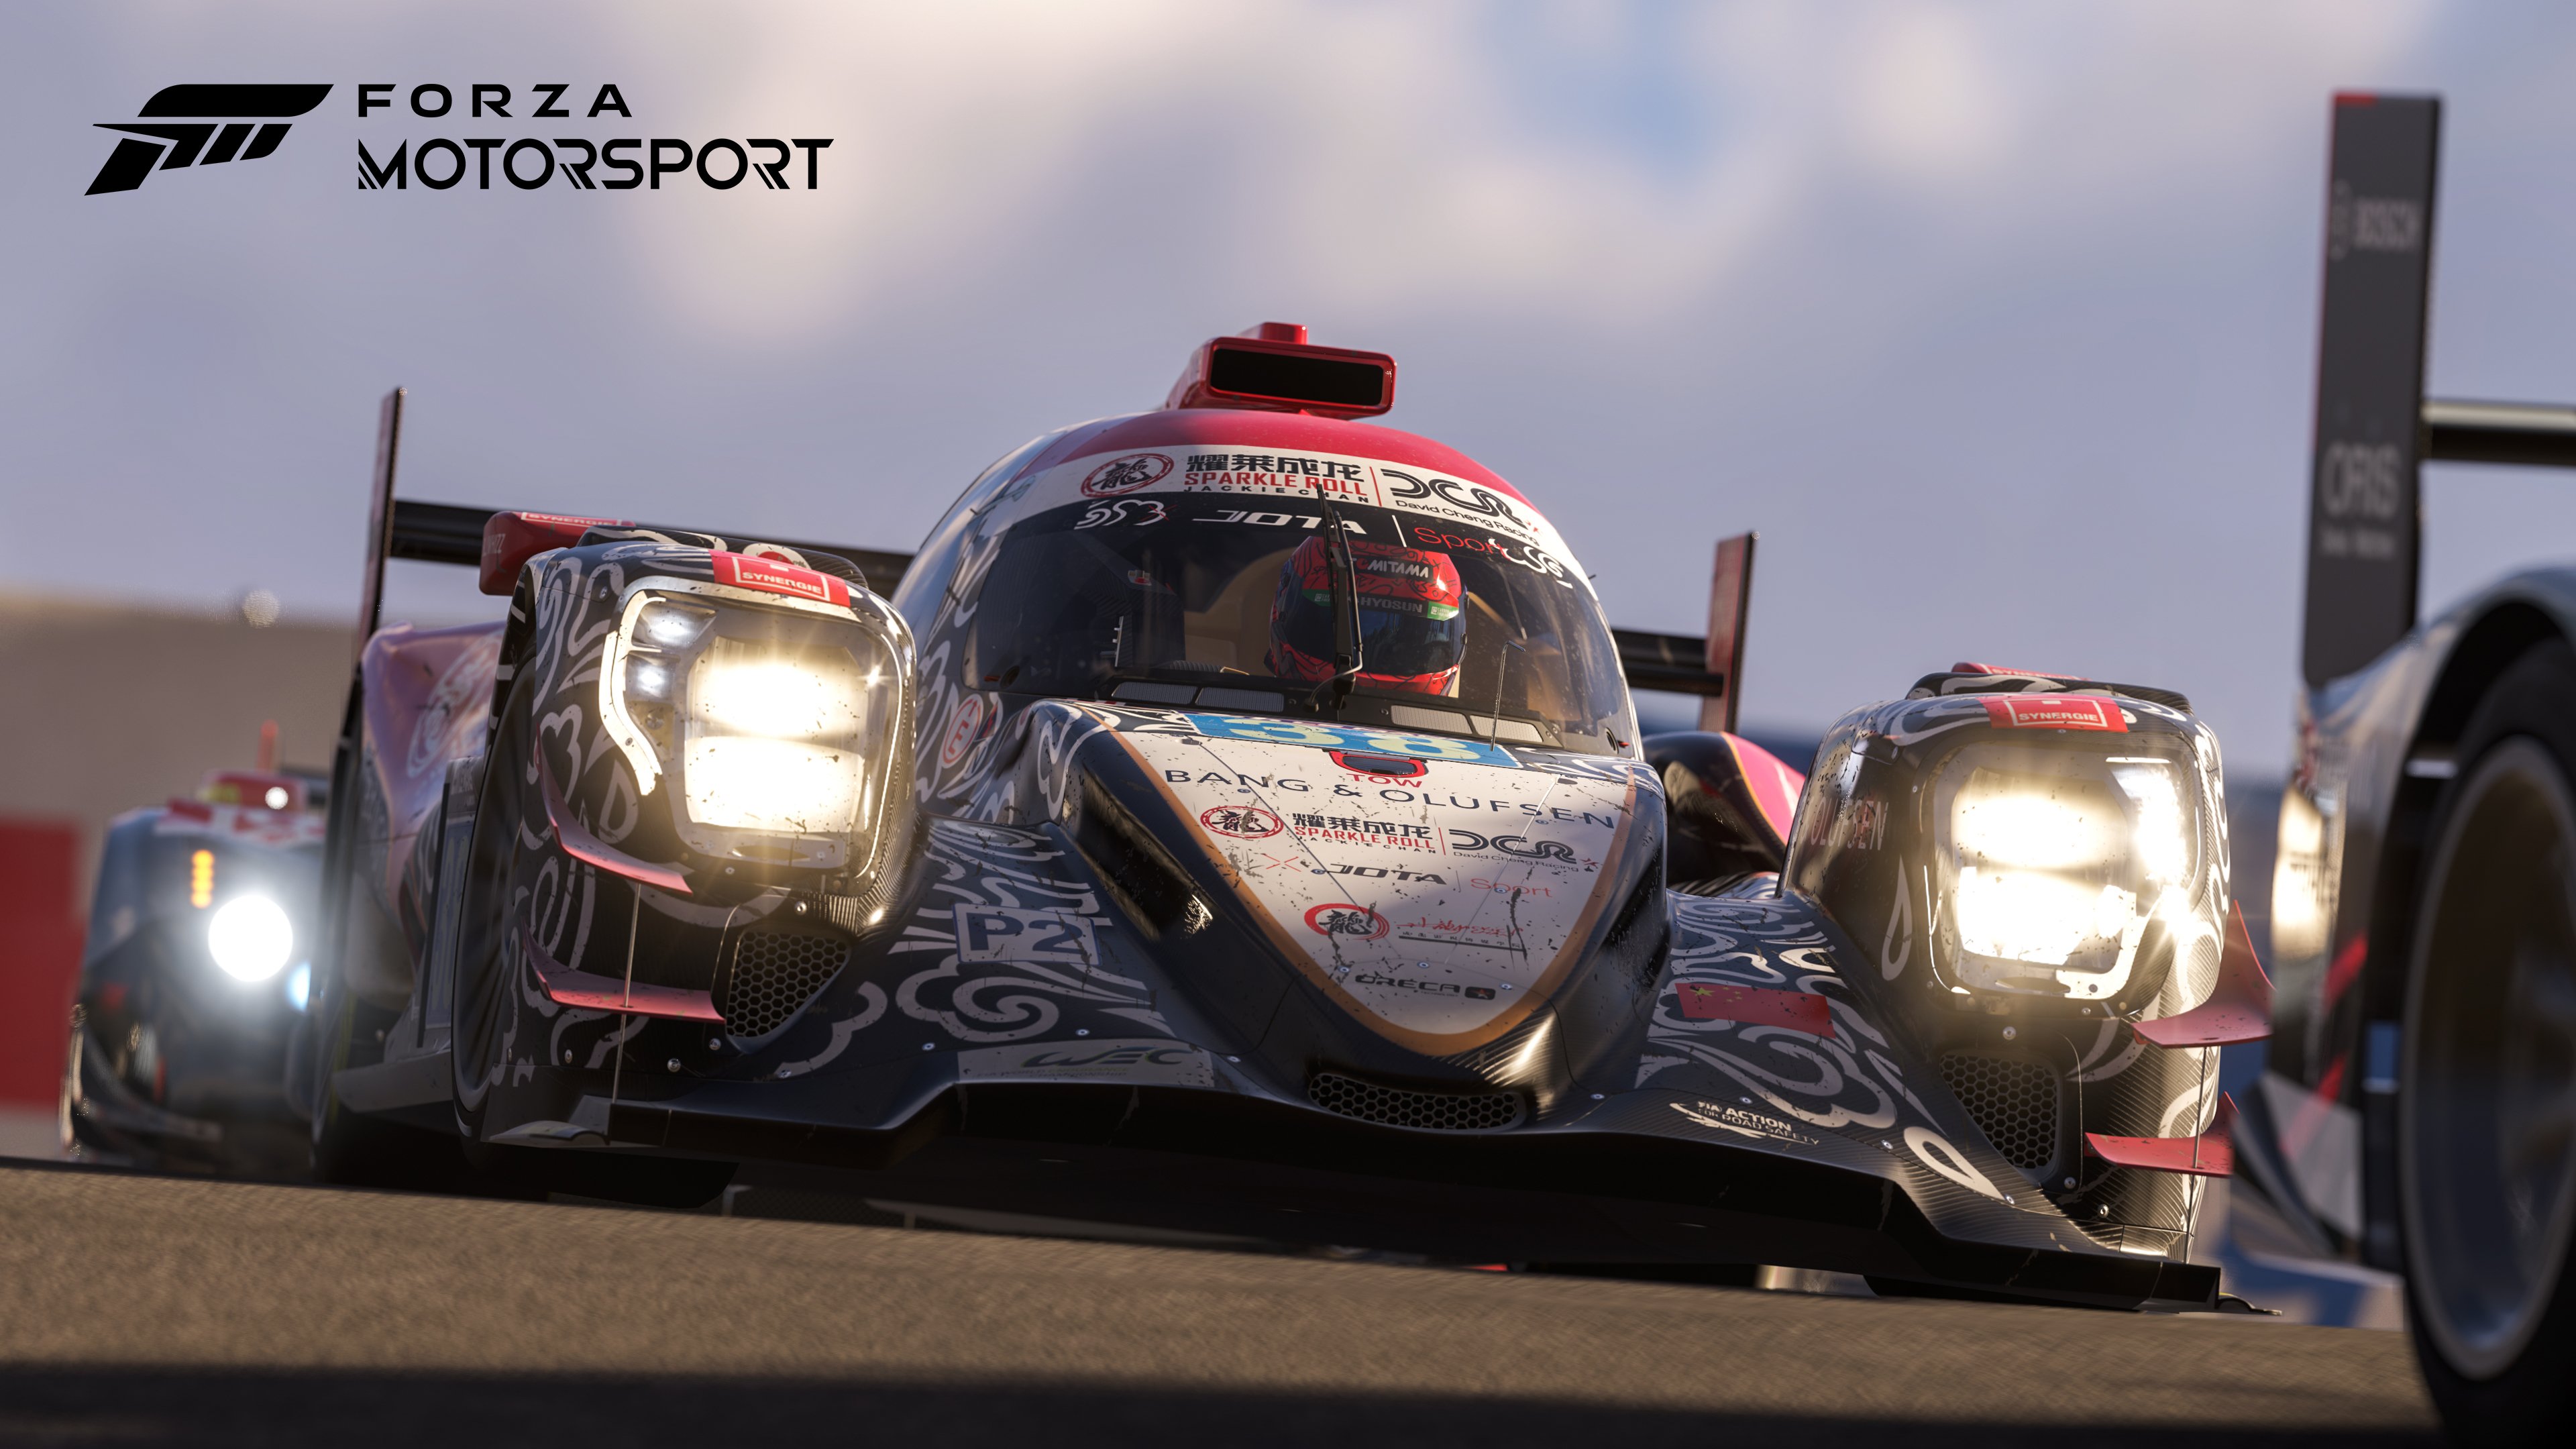 Forza Motorsport on X: Gaming is for everyone. We're grateful to